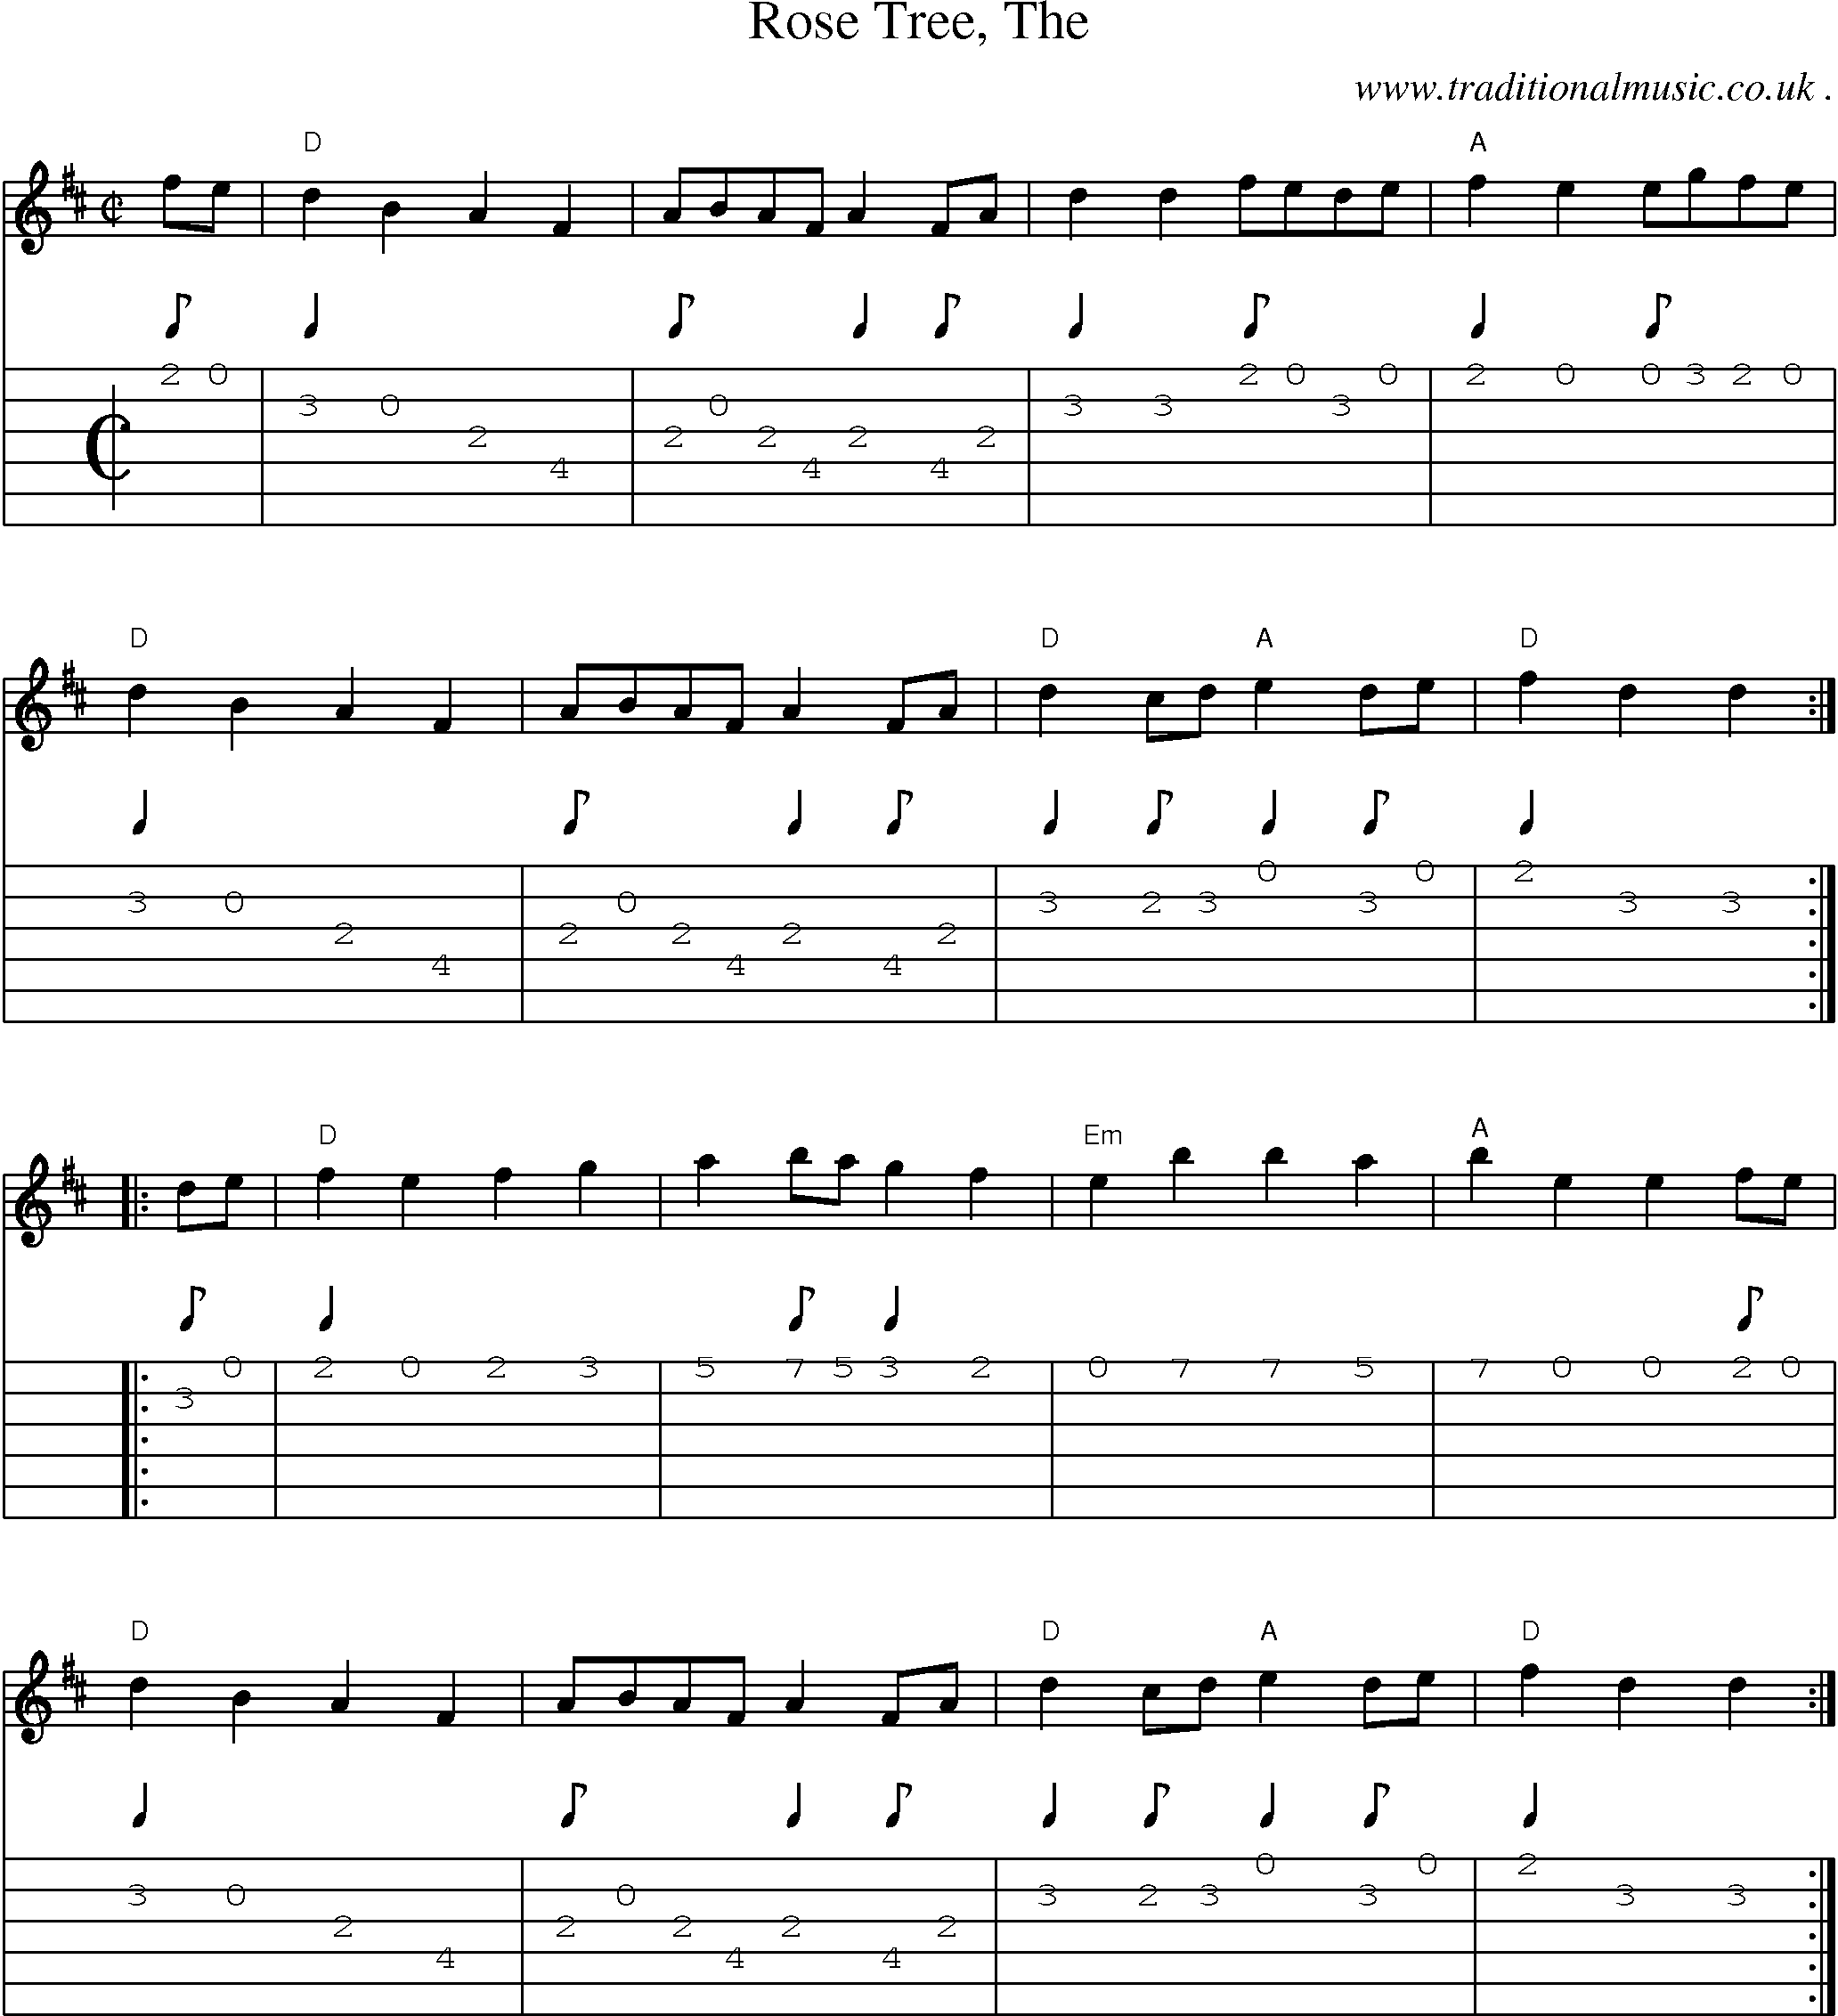 Music Score and Guitar Tabs for Rose Tree The